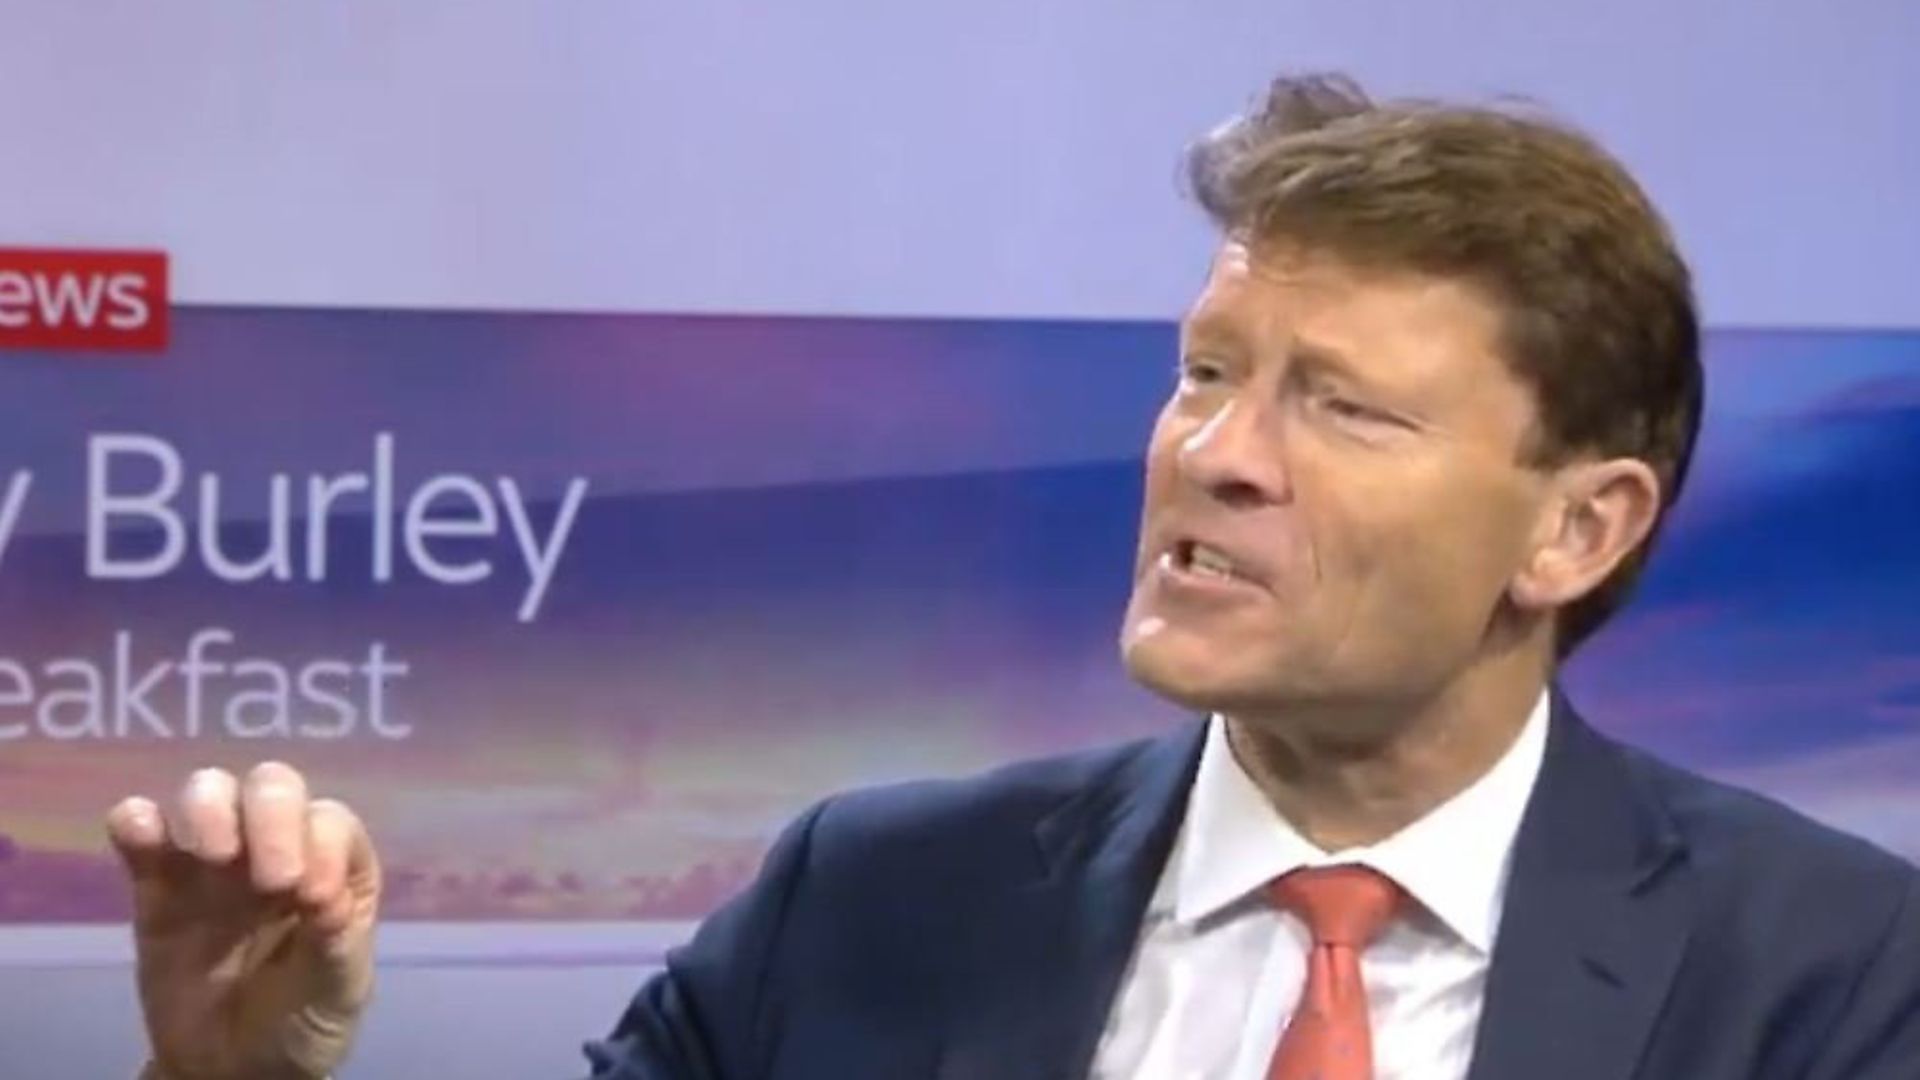 Brexit Party chairman Richard Tice said Nigel Farage is "very brave" not to stand in the next general election. Picture: Sky News - Credit: Sky News